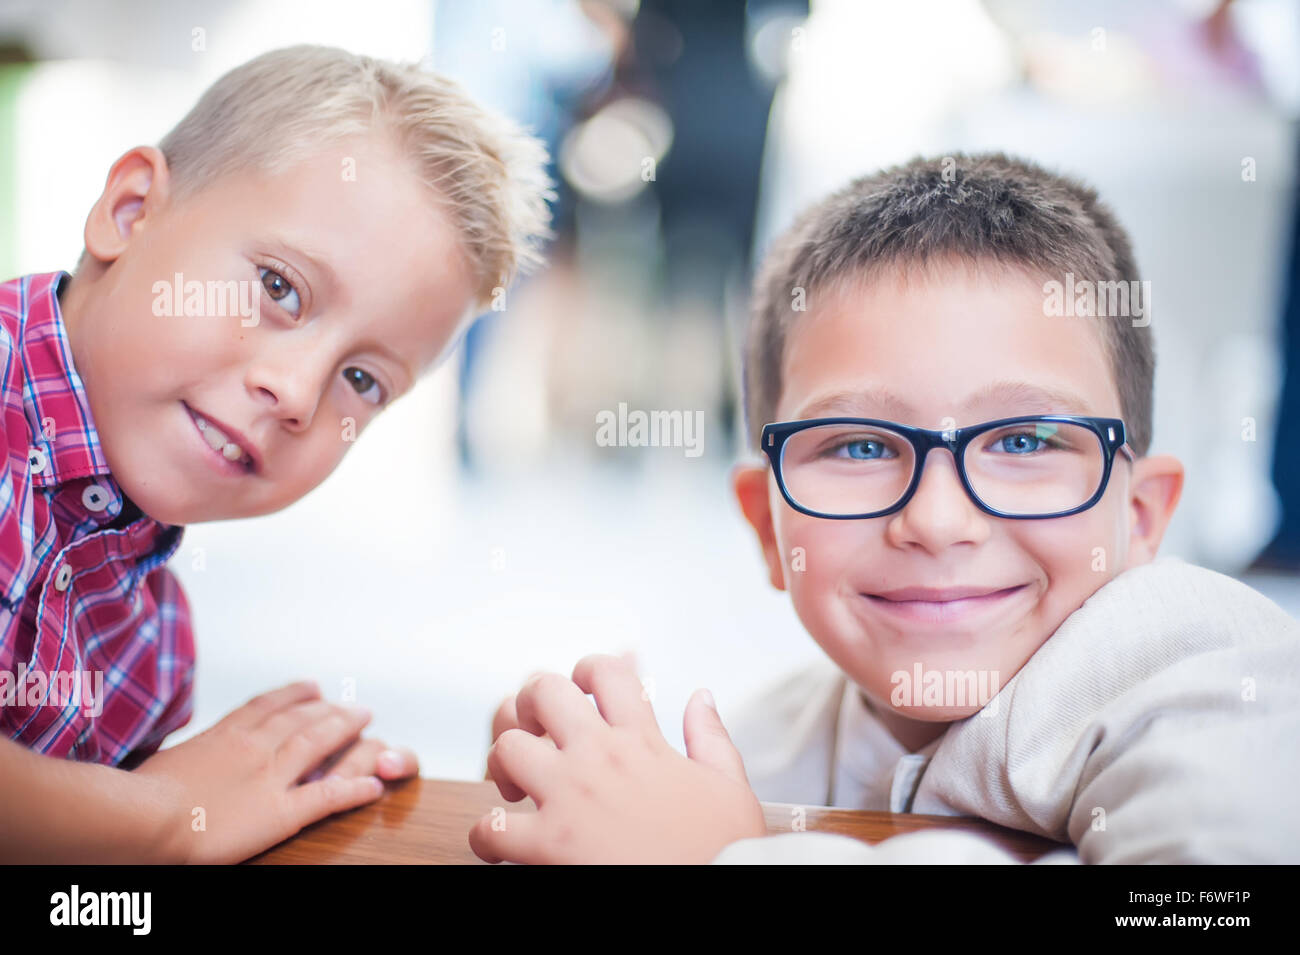 Two young friend looking at the camera Stock Photo